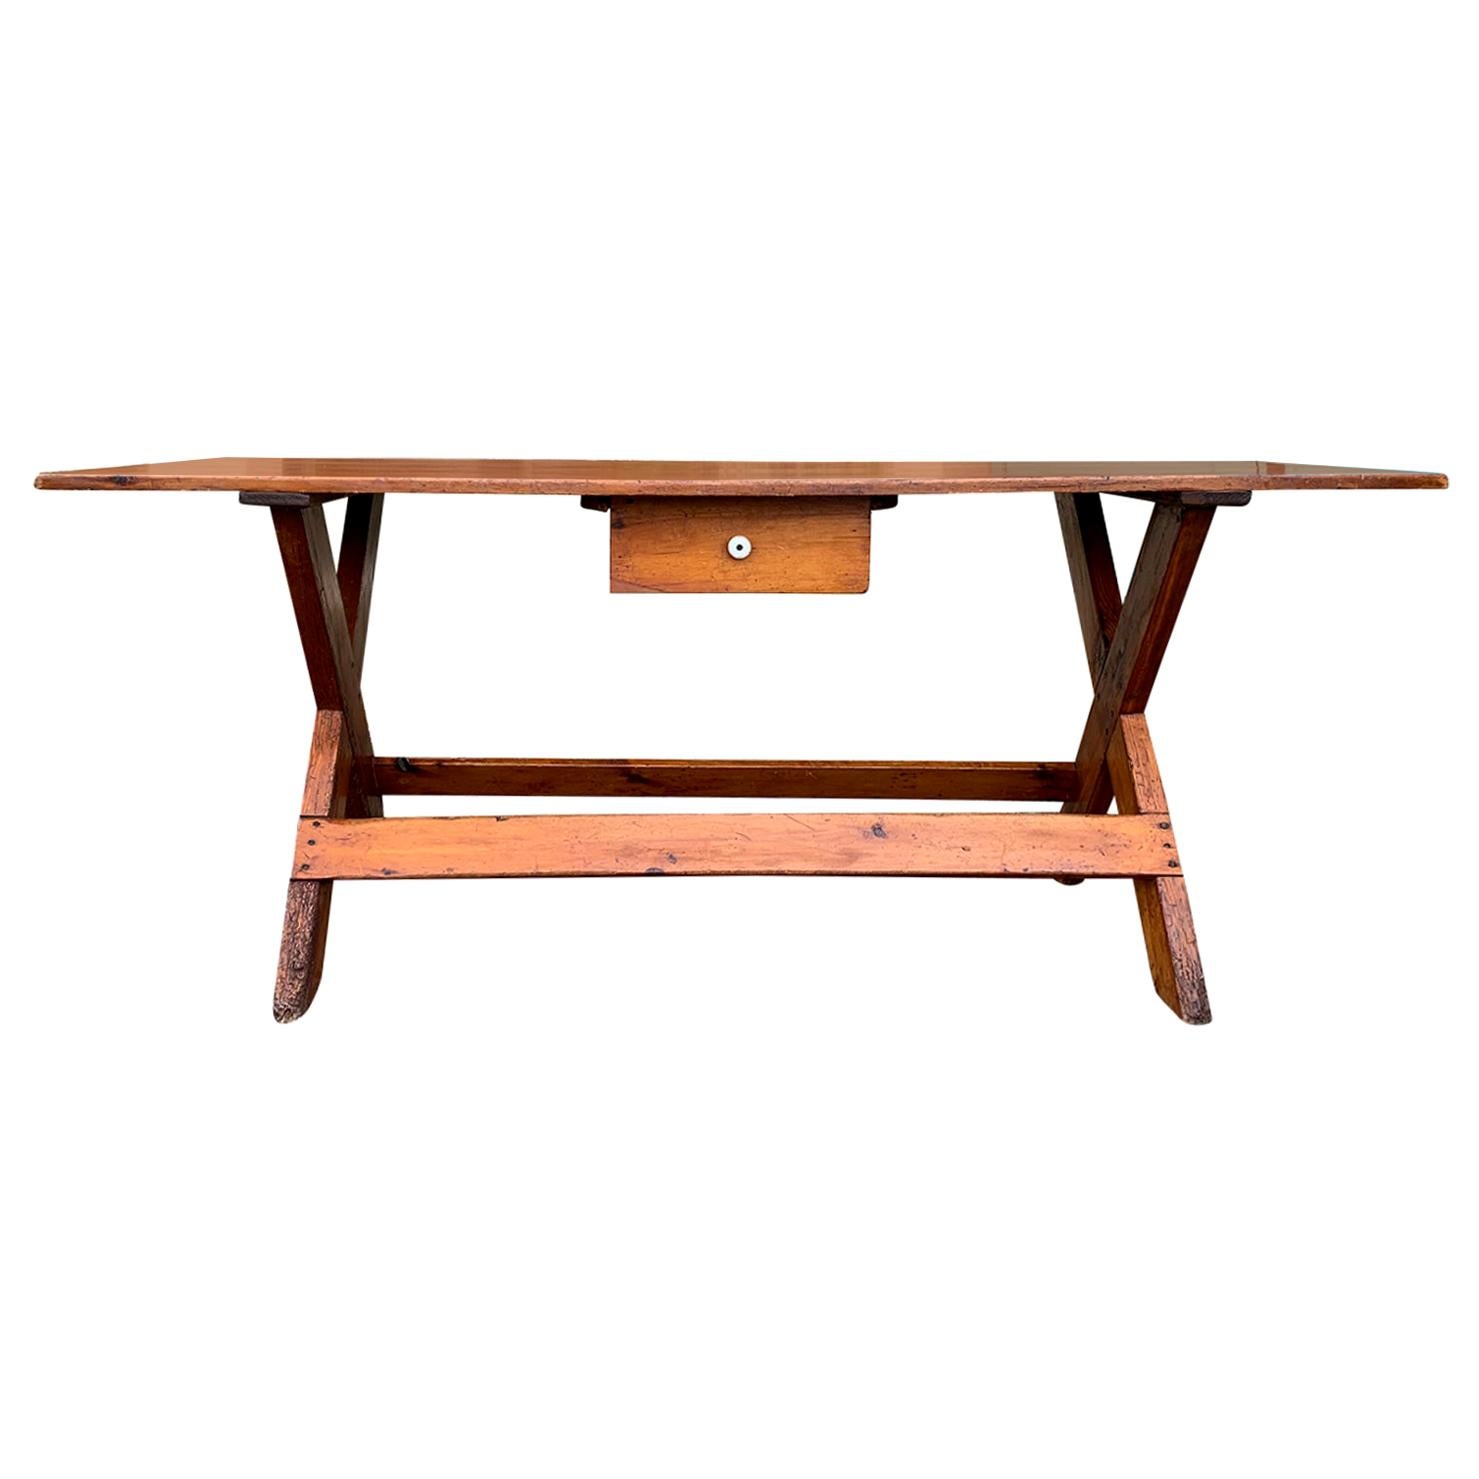 19th Century American Pine Sawbuck Dining Table or Console with Drawer For Sale